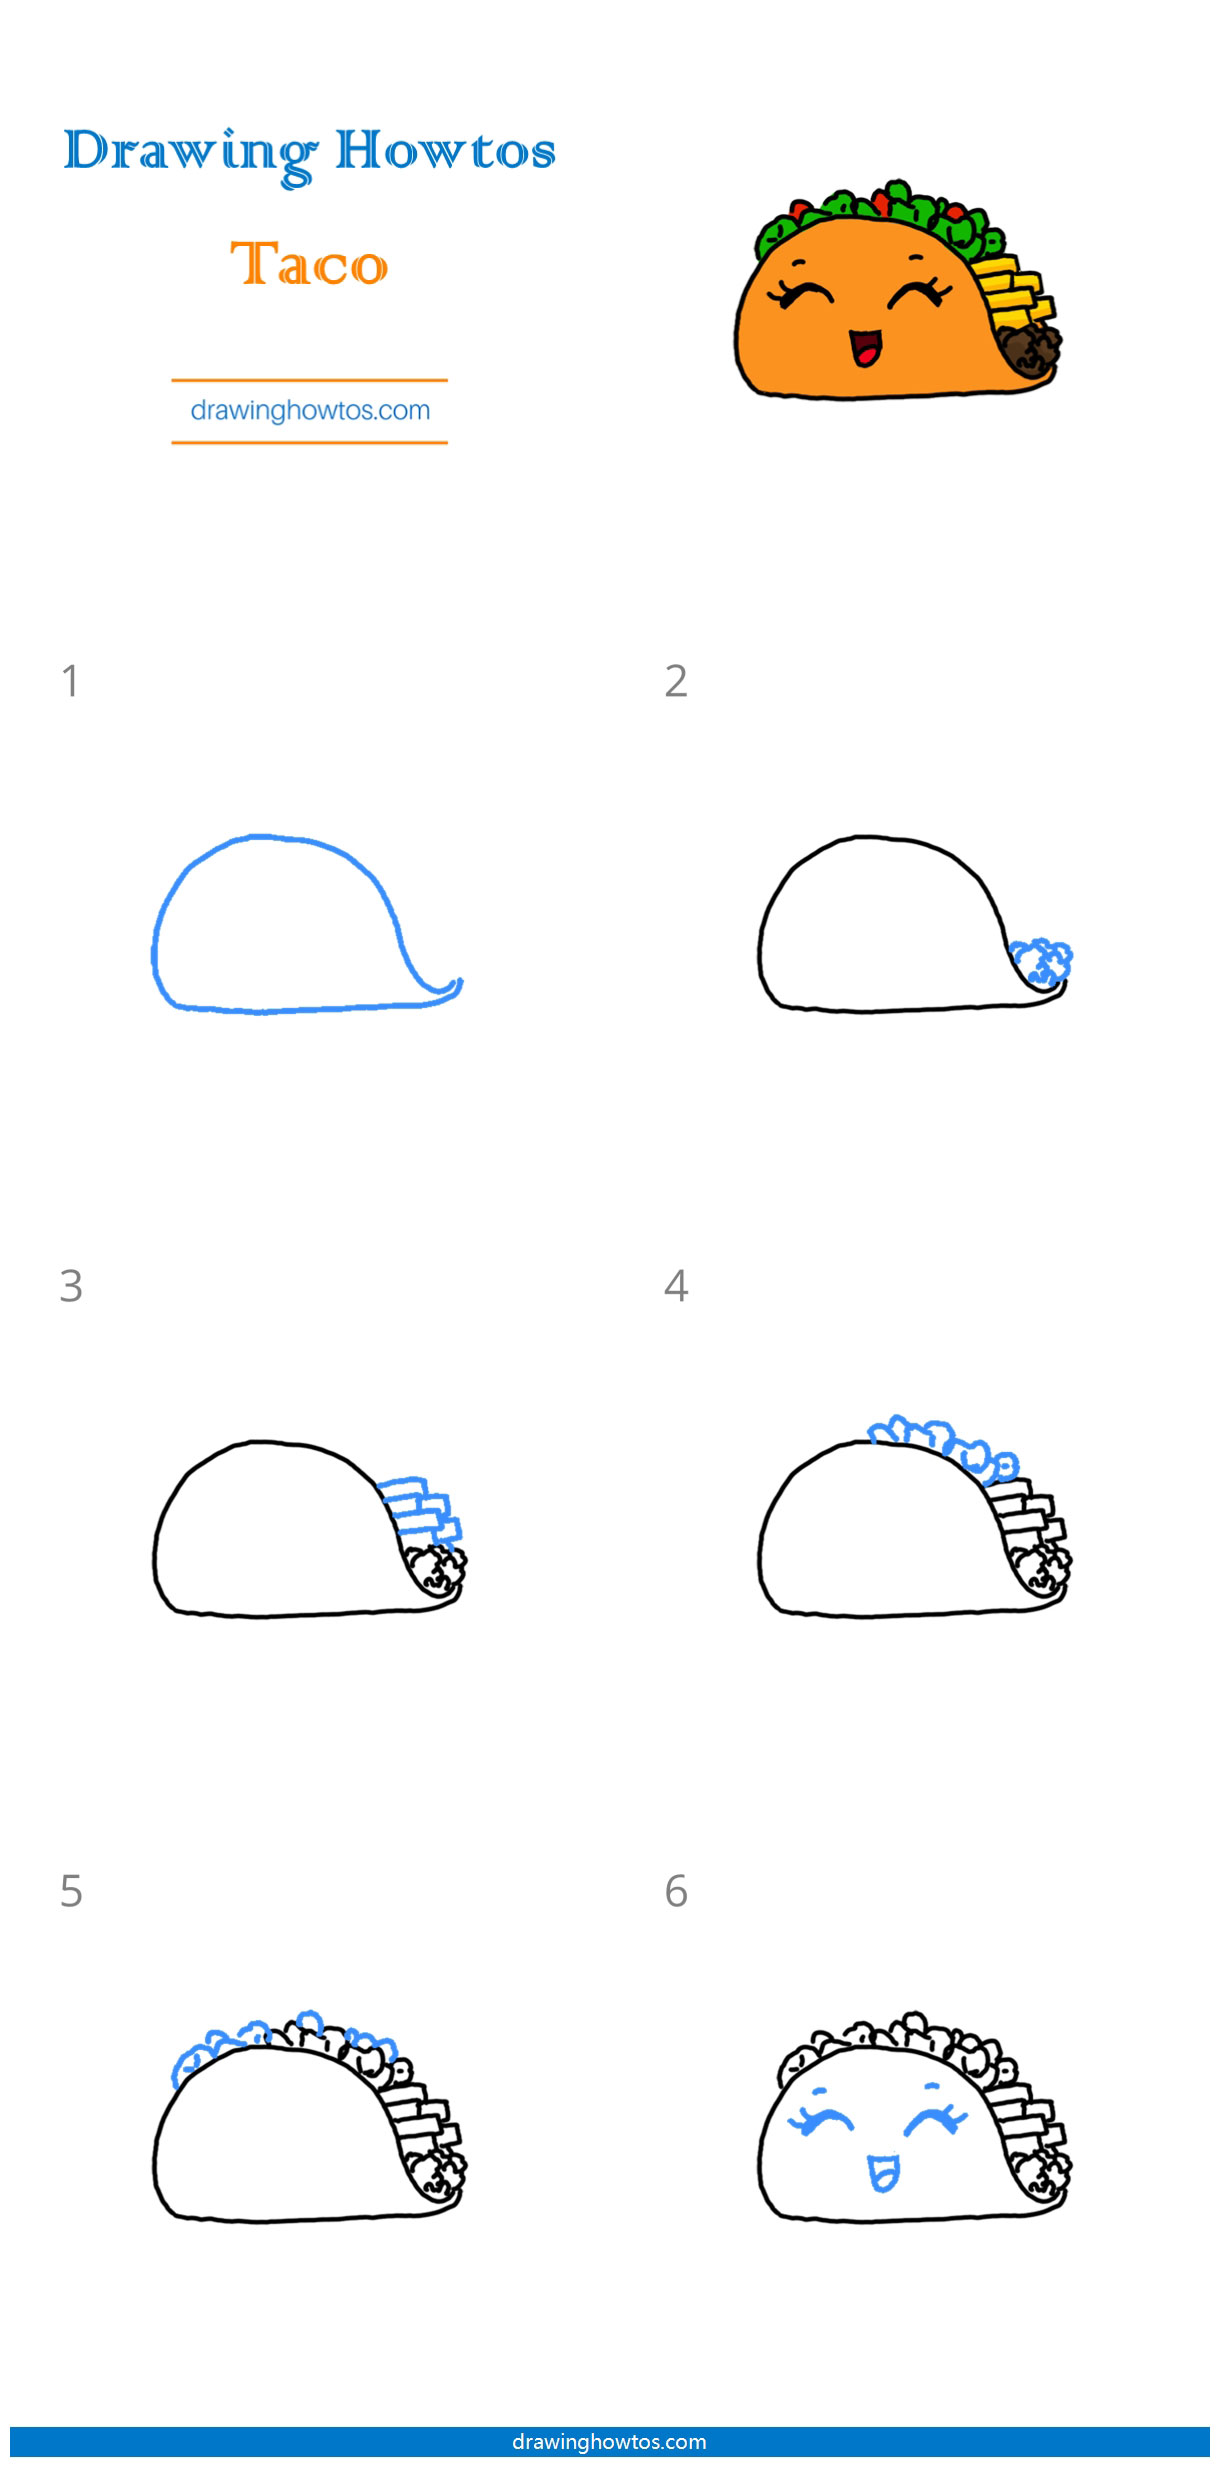 How to Draw a Taco Step by Step